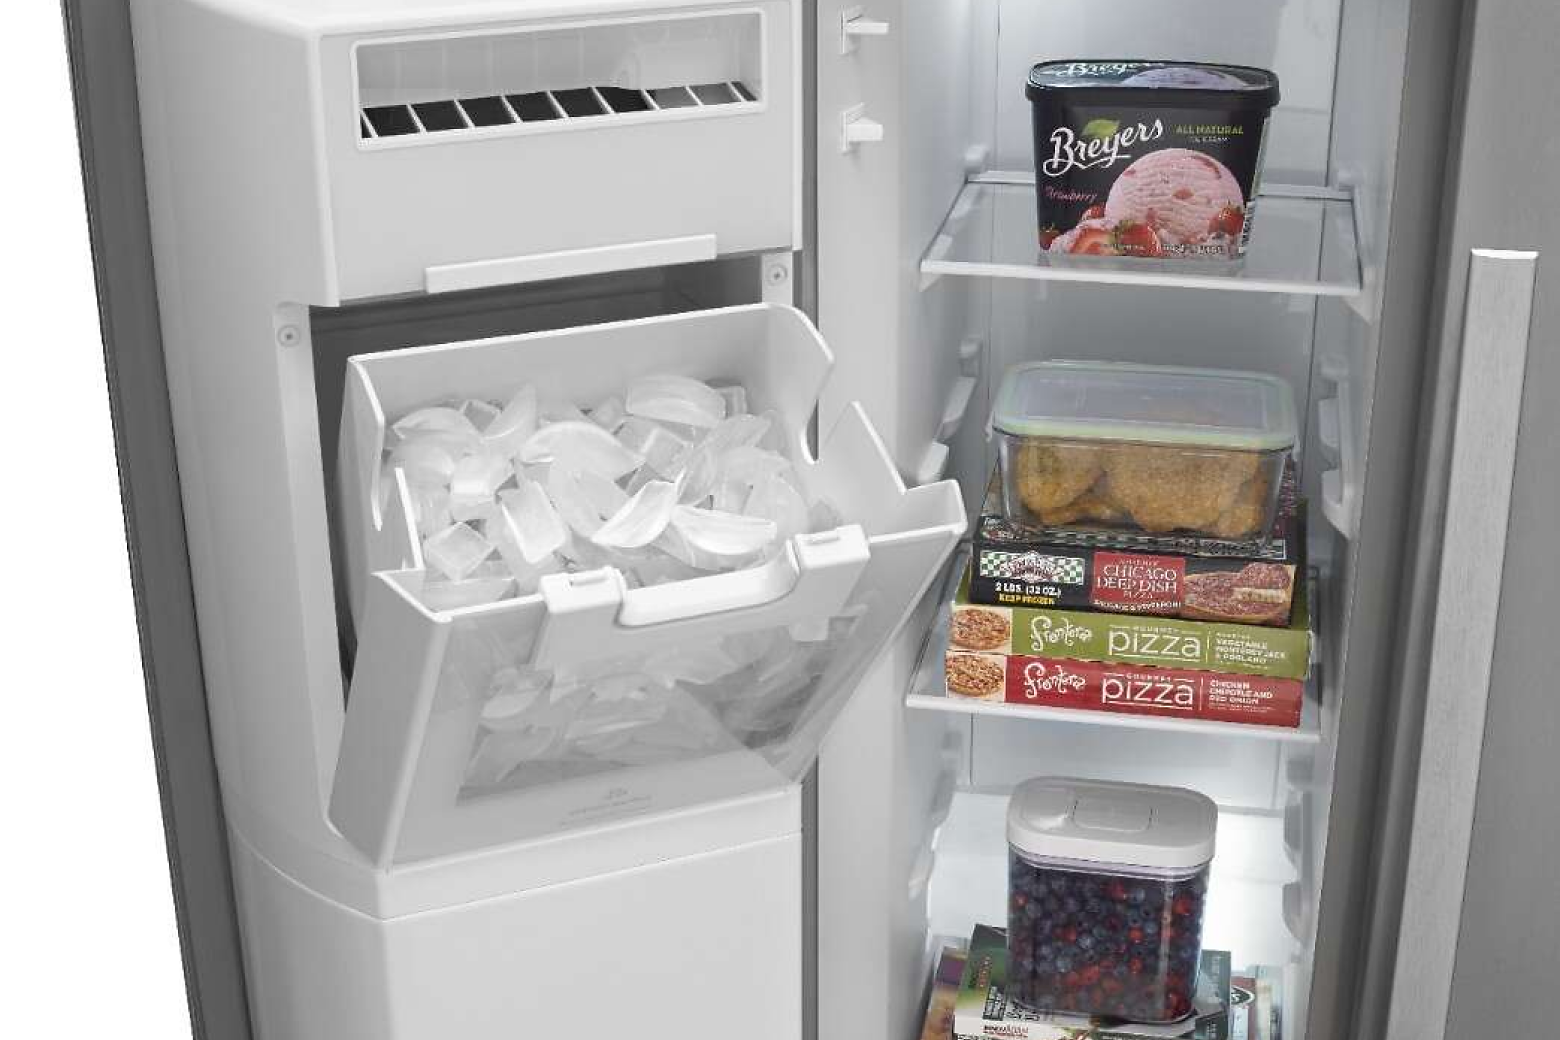 Samsung Refrigerator Ice Maker Not Working? - Maughanster Appliance